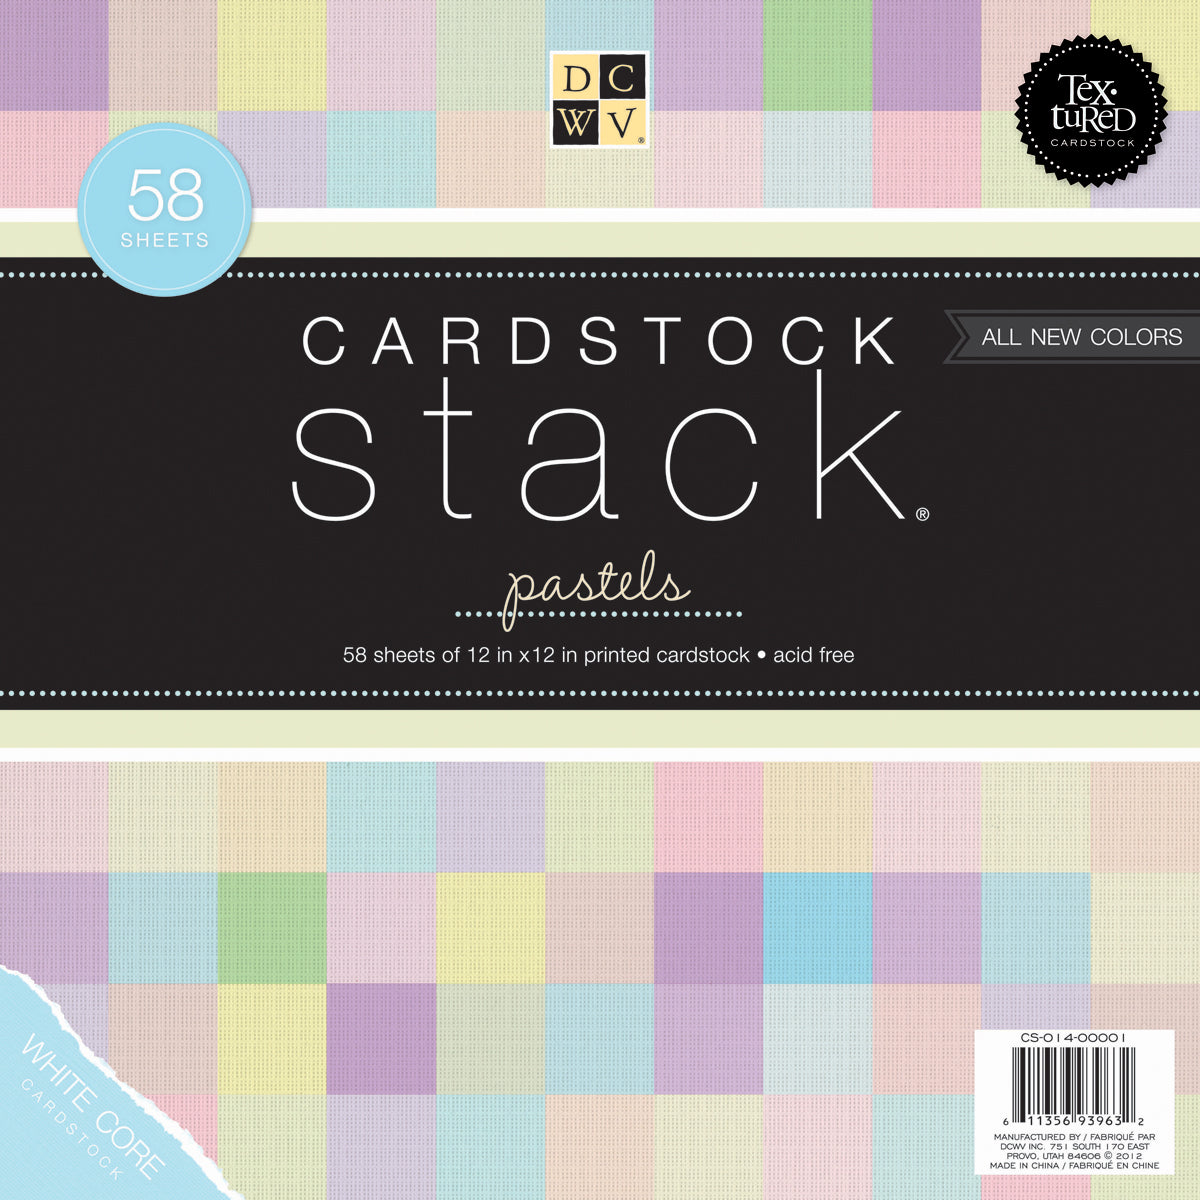 48 pages printed cardstock 12x12 new